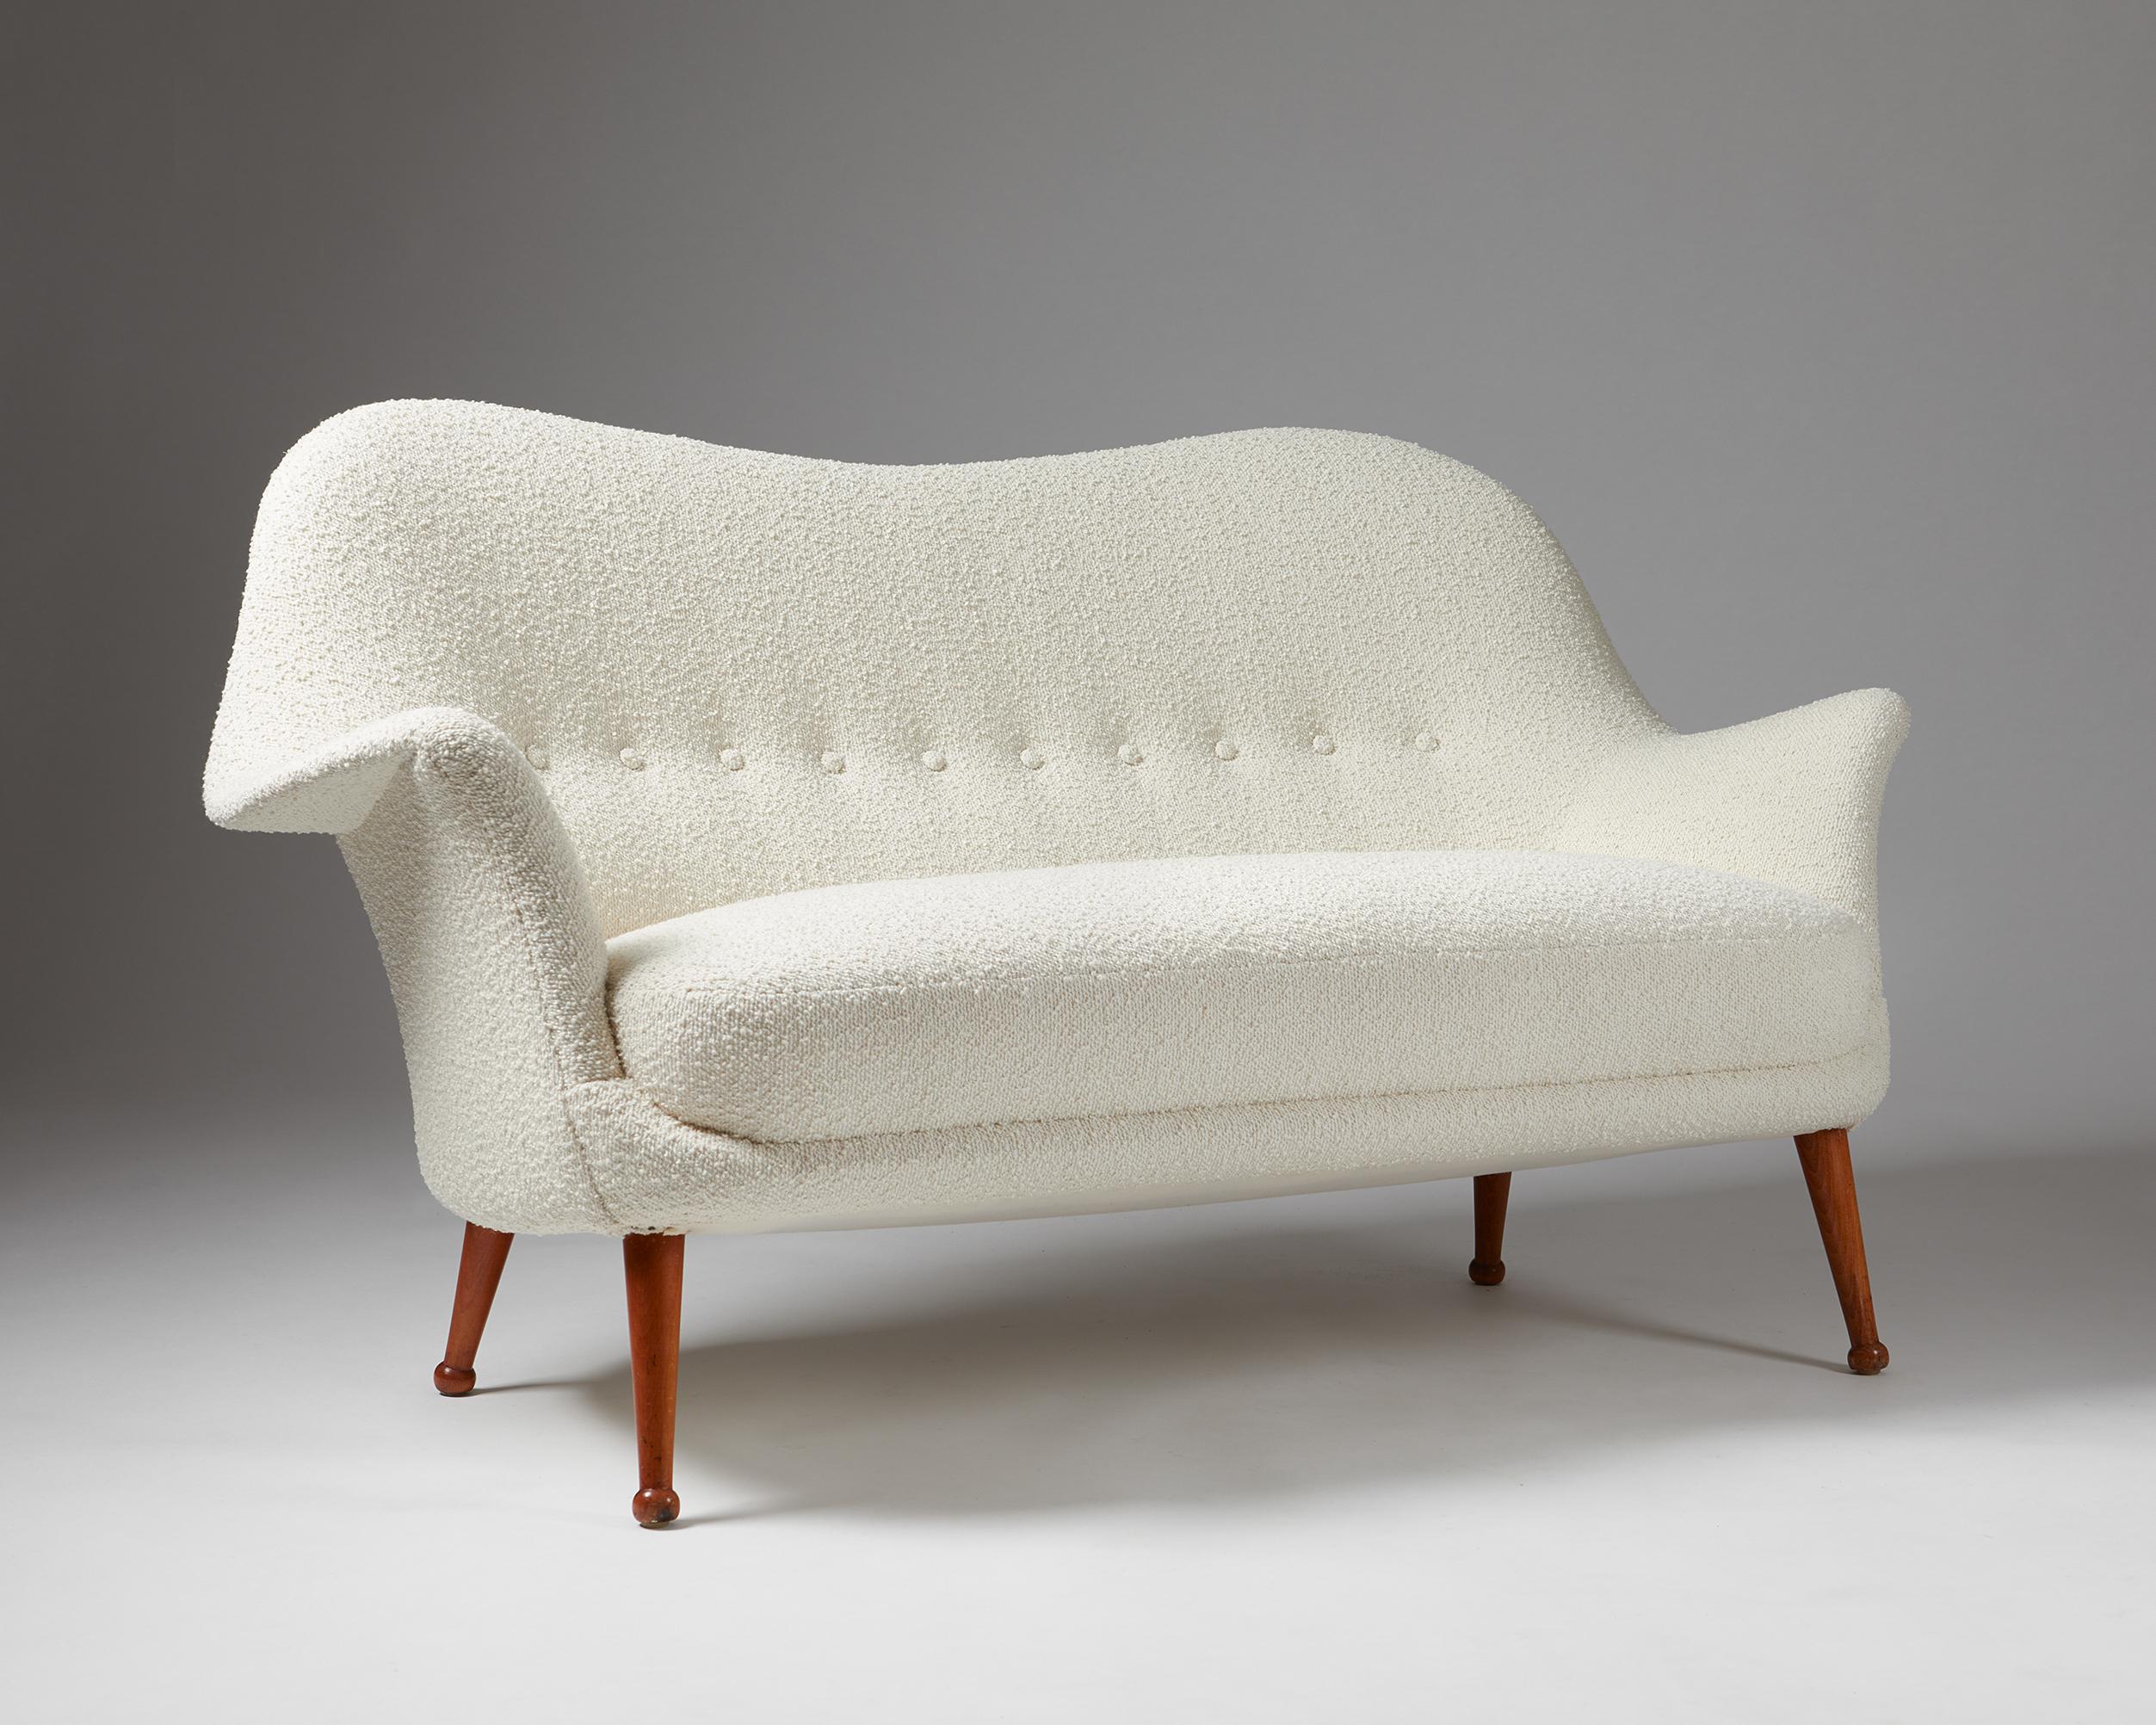 Swedish Sofa and Armchair “Divina” Designed by Arne Norell, for Norell Möbler, Sweden For Sale